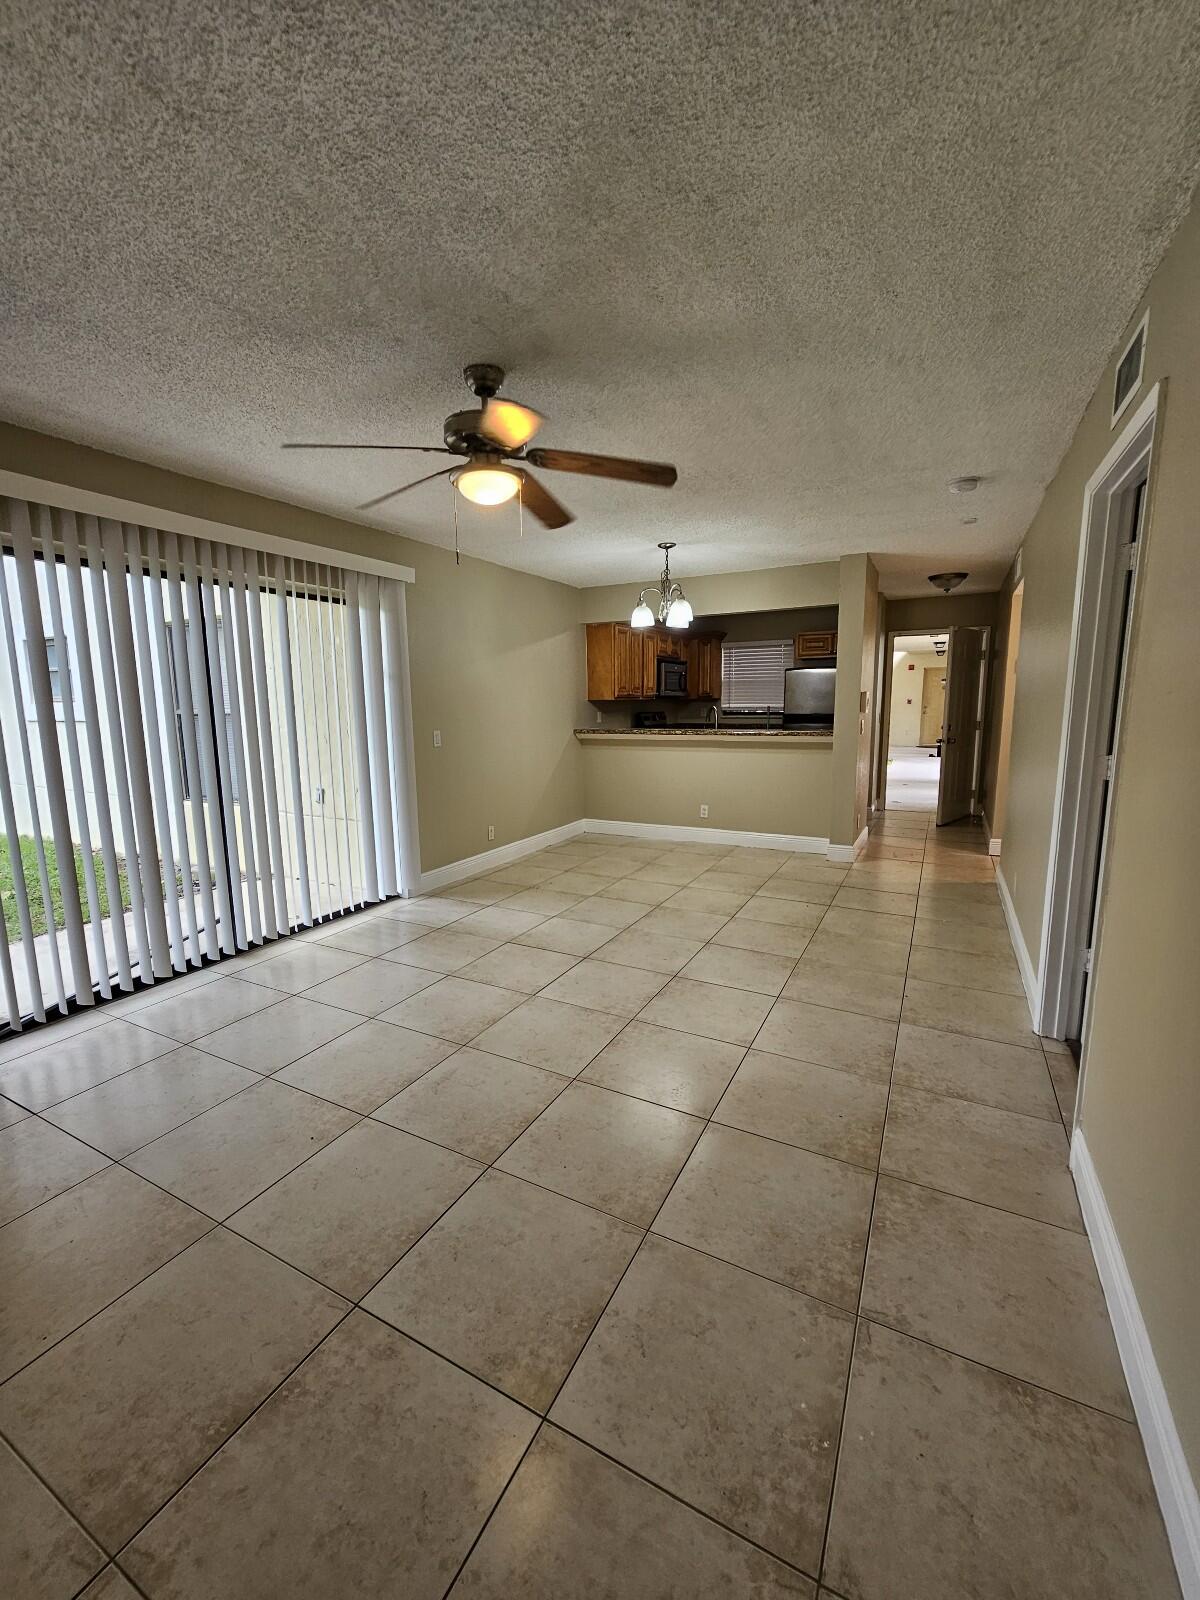 Property for Sale at 1561 Windorah Way A, West Palm Beach, Palm Beach County, Florida - Bedrooms: 2 
Bathrooms: 2  - $220,000